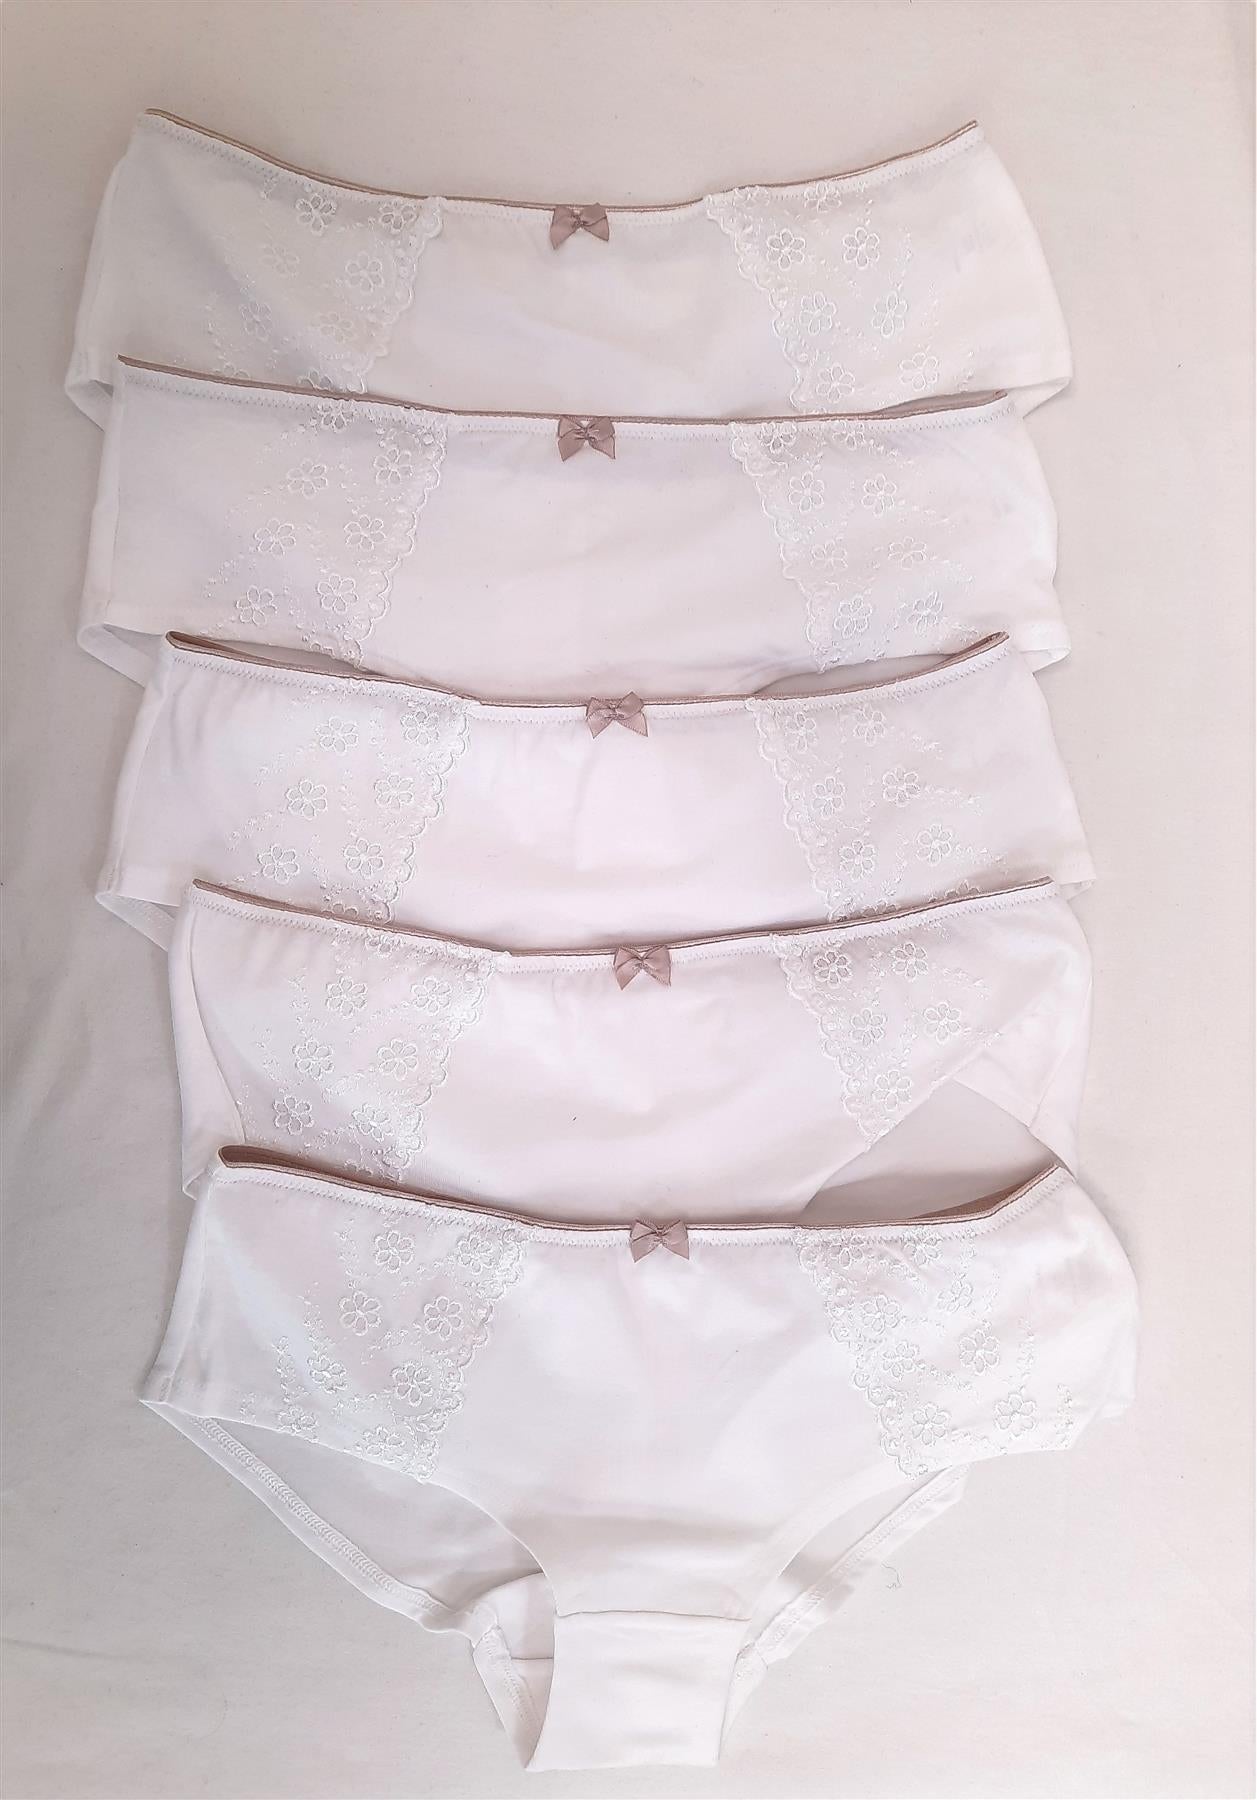 Embroidered Short Brief Knickers 5x Pairs